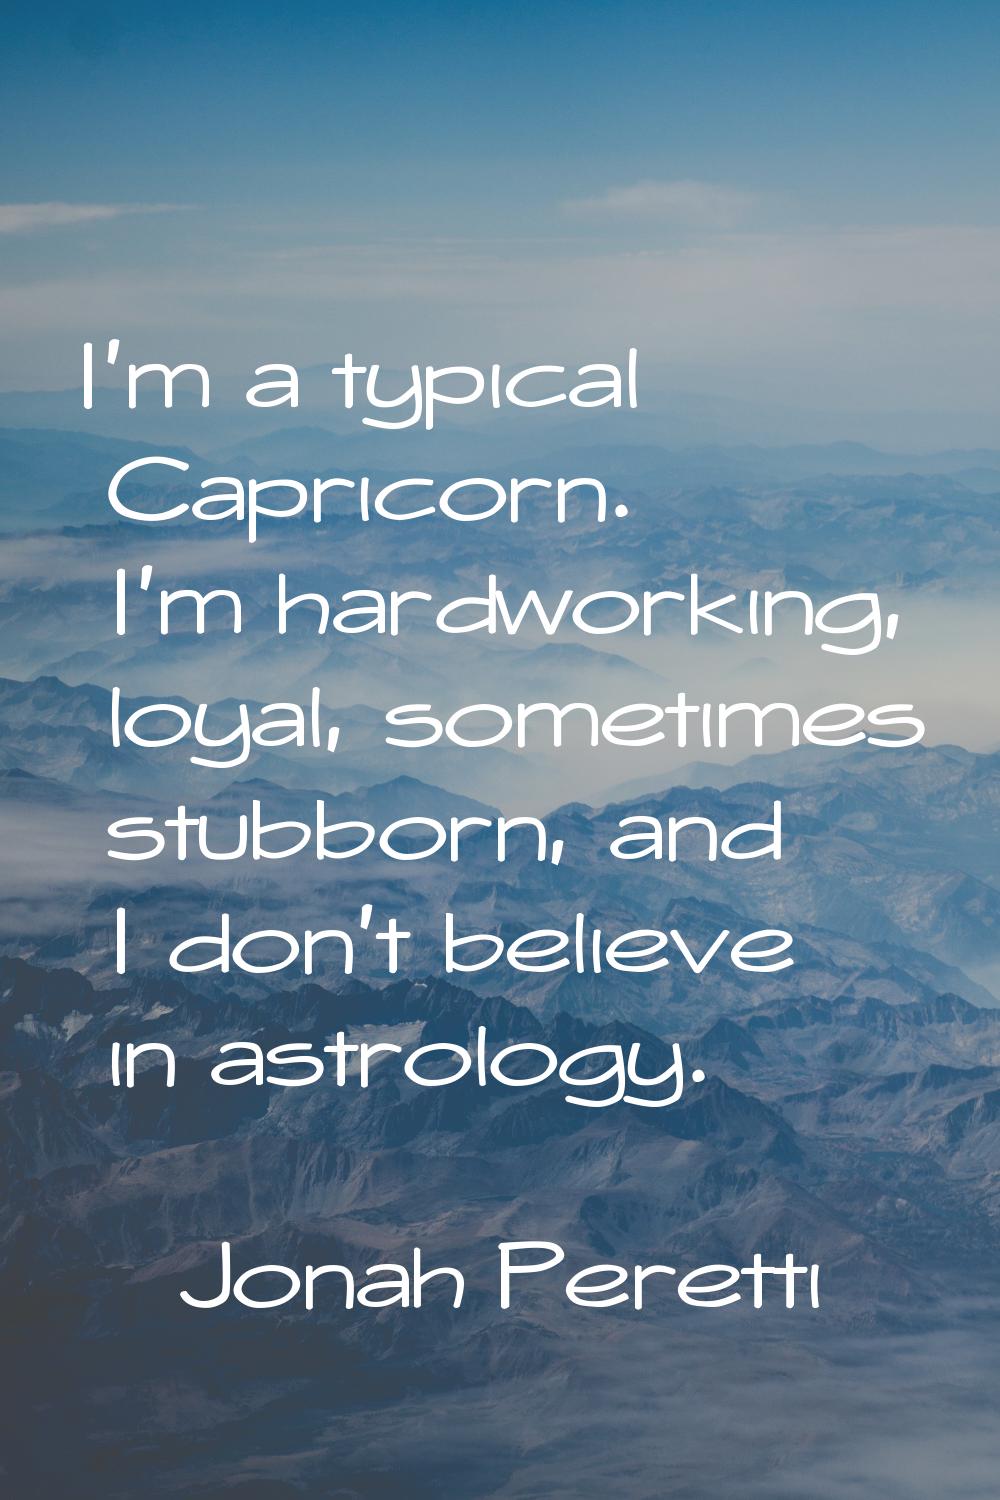 I'm a typical Capricorn. I'm hardworking, loyal, sometimes stubborn, and I don't believe in astrolo